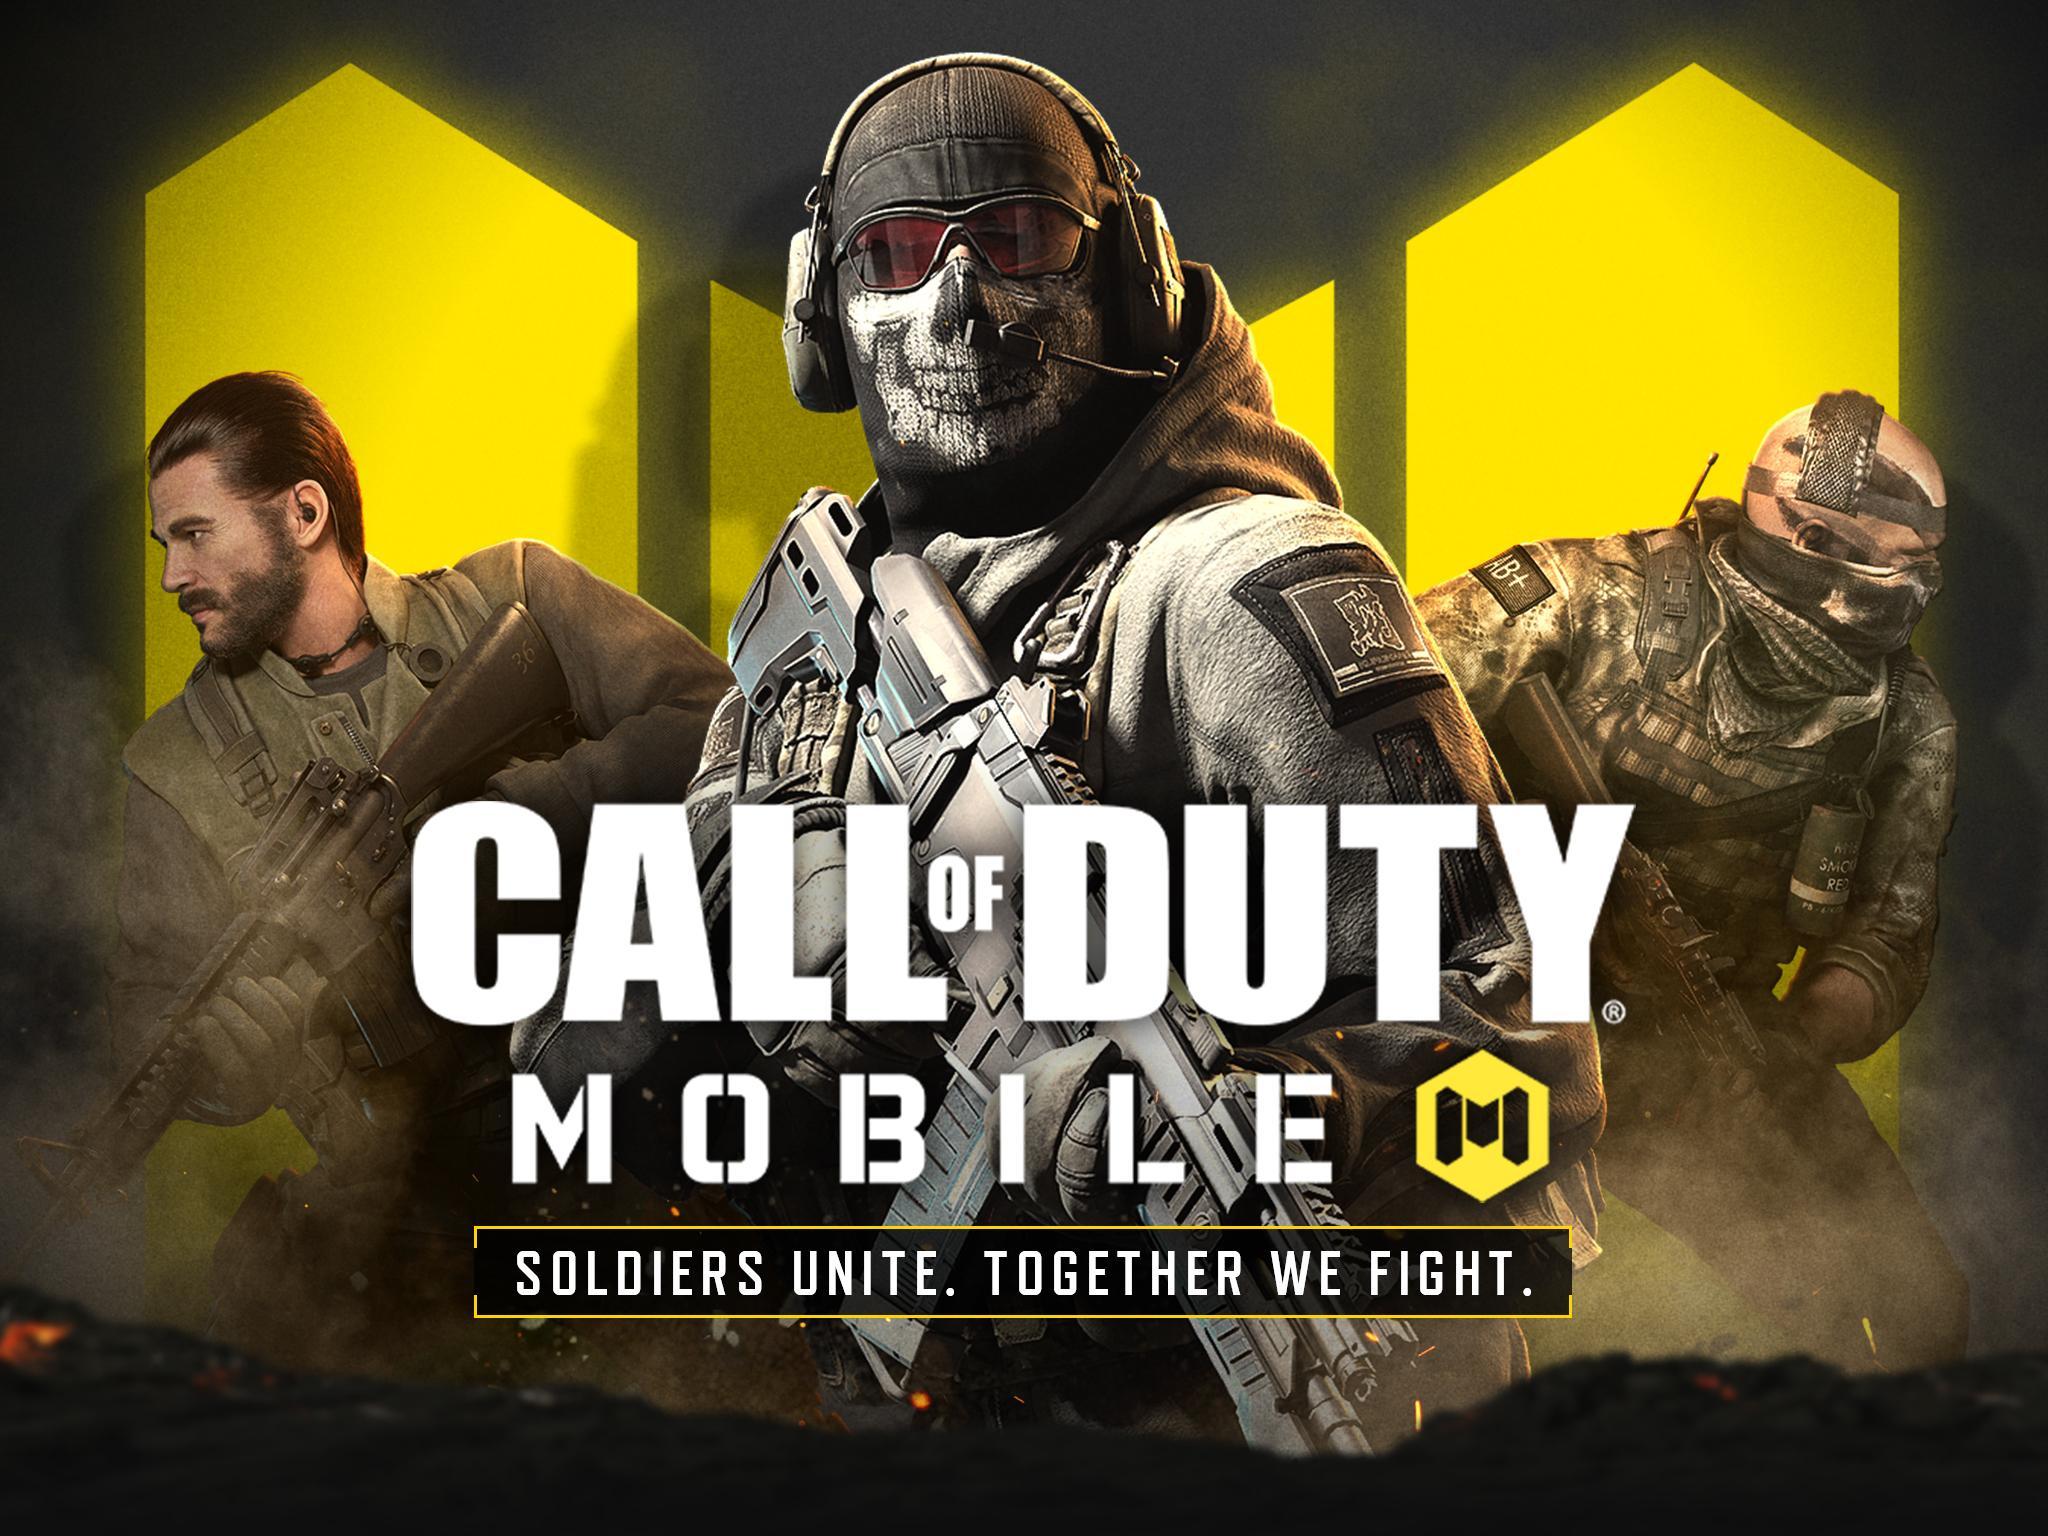 😘 h@ck 9999 😘 appstweaked.com Call Of Duty Mobile Apk Version 1.0.0